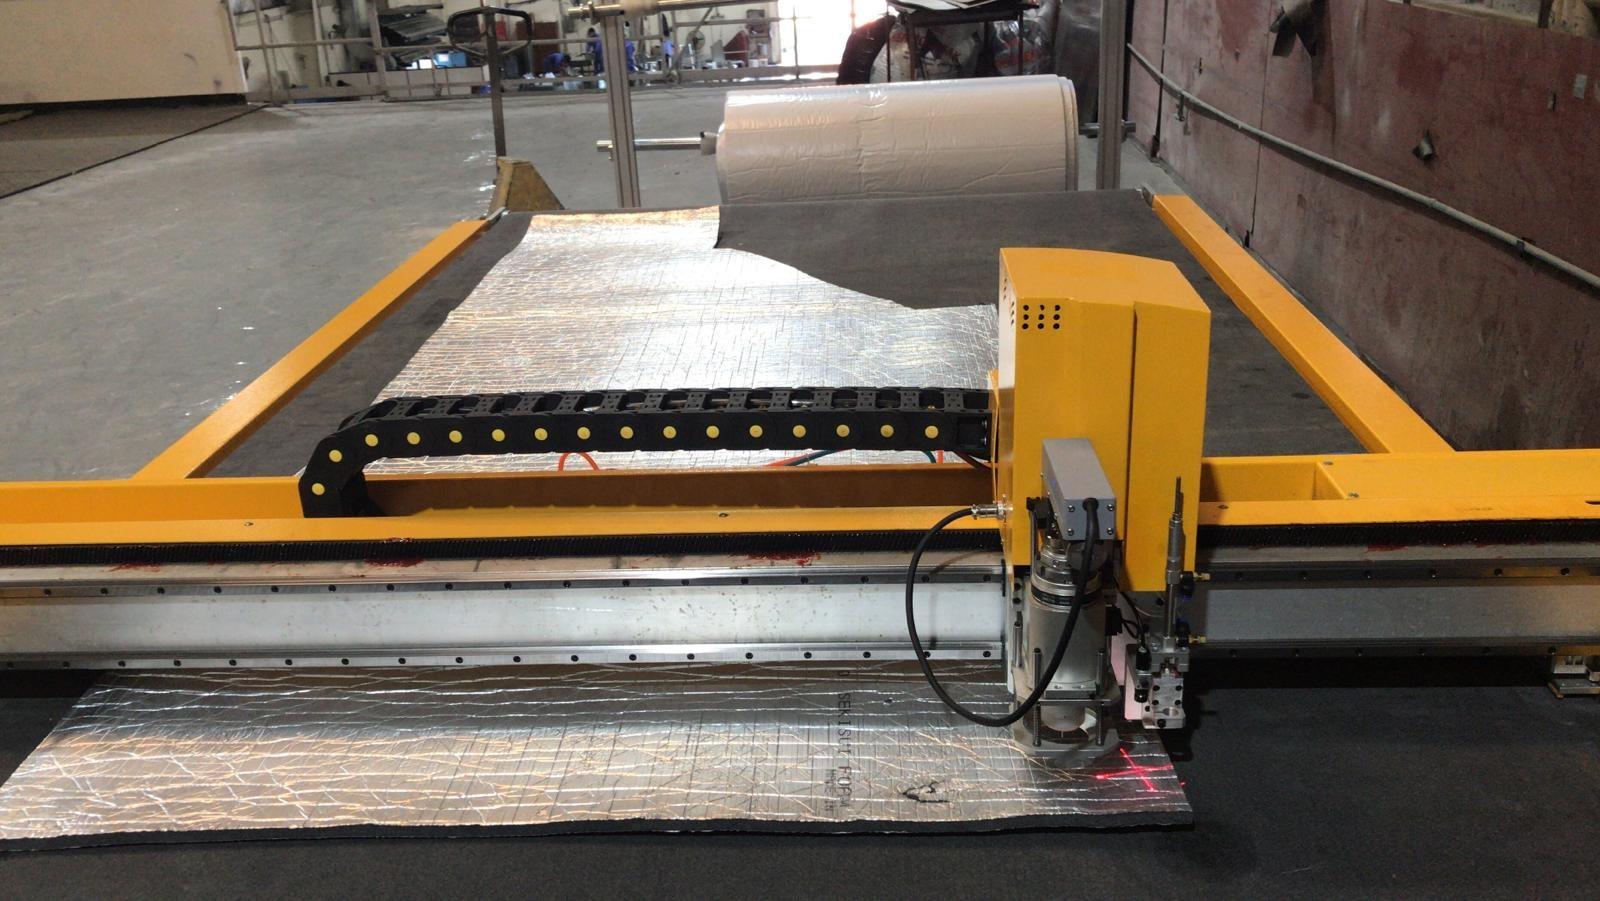 HVAC Thermal Insulation Cotton Fiberglass Rubber Shaped Cutting Machine With Automatic Feeding Table Vibrating Oscillating Knife